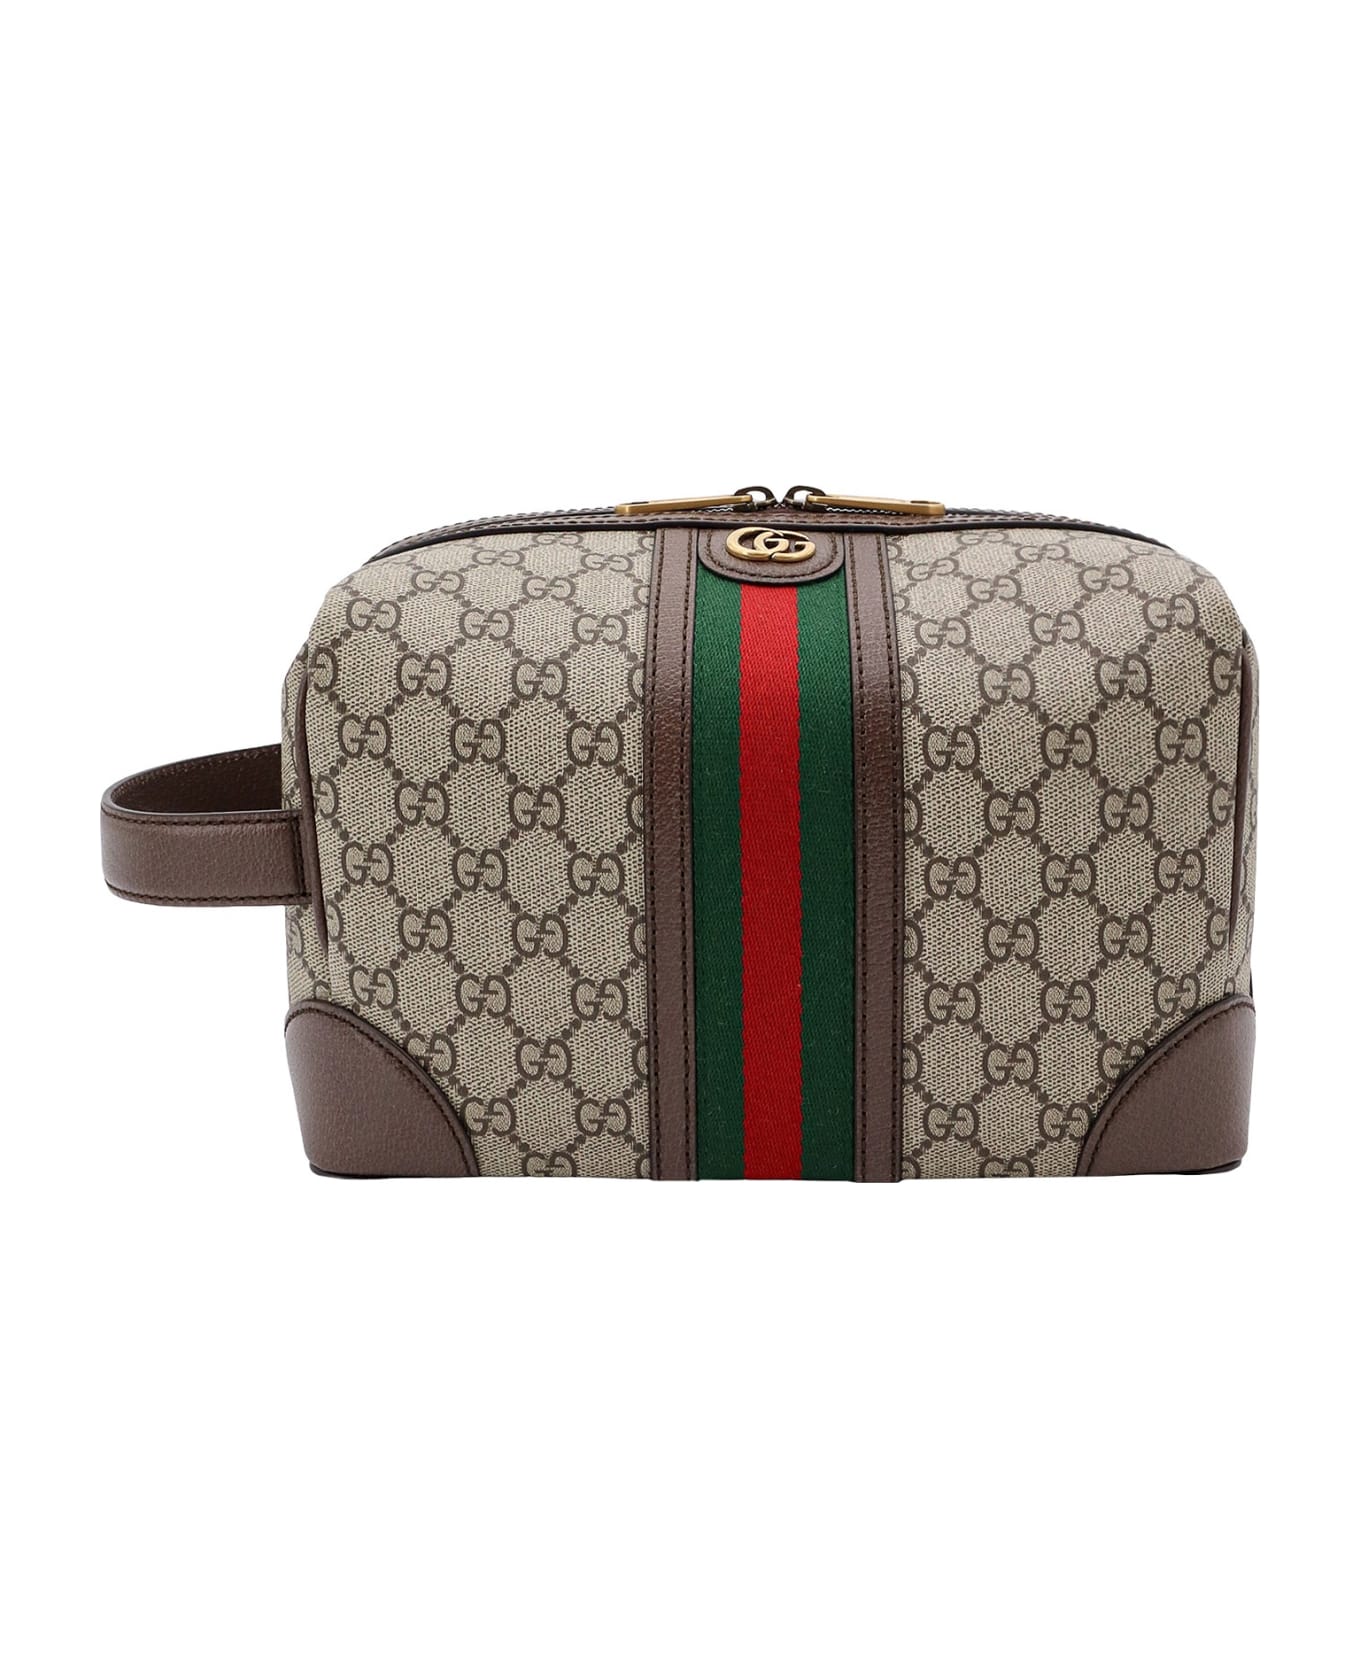 Gucci Savoy Beauty Case - Brown